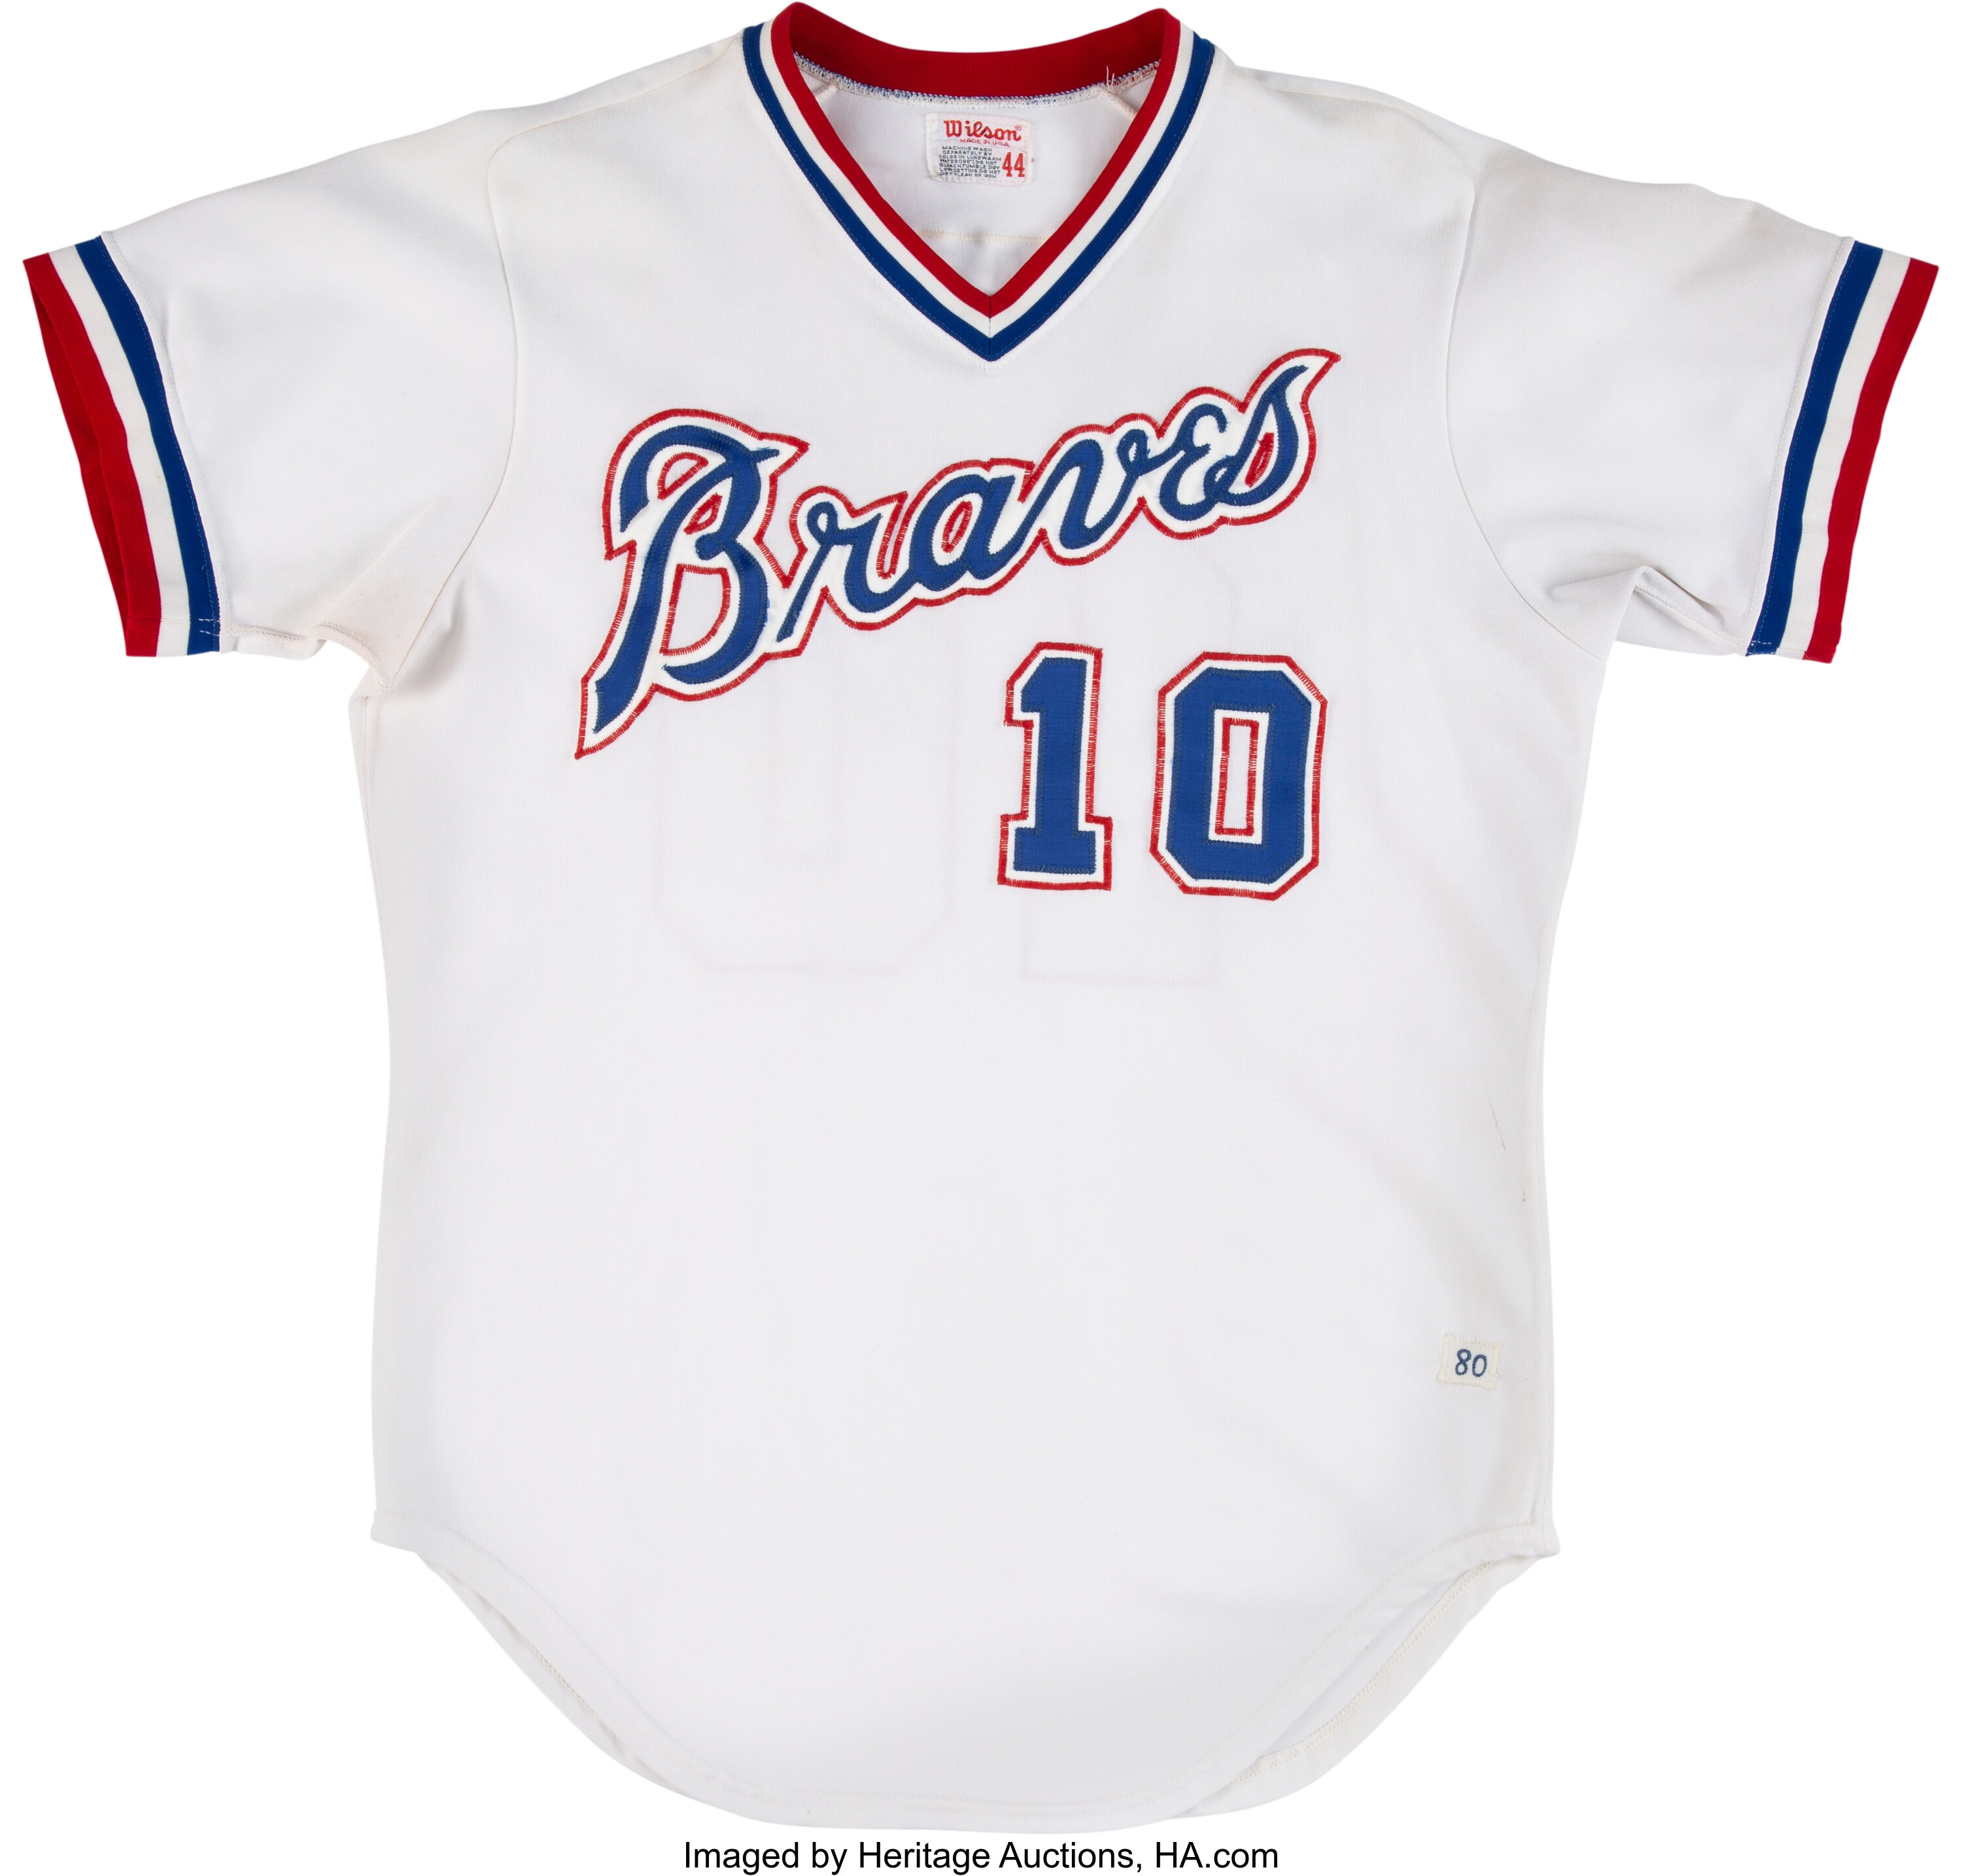 Come on, Braves. Give those sweet '80s jerseys some love